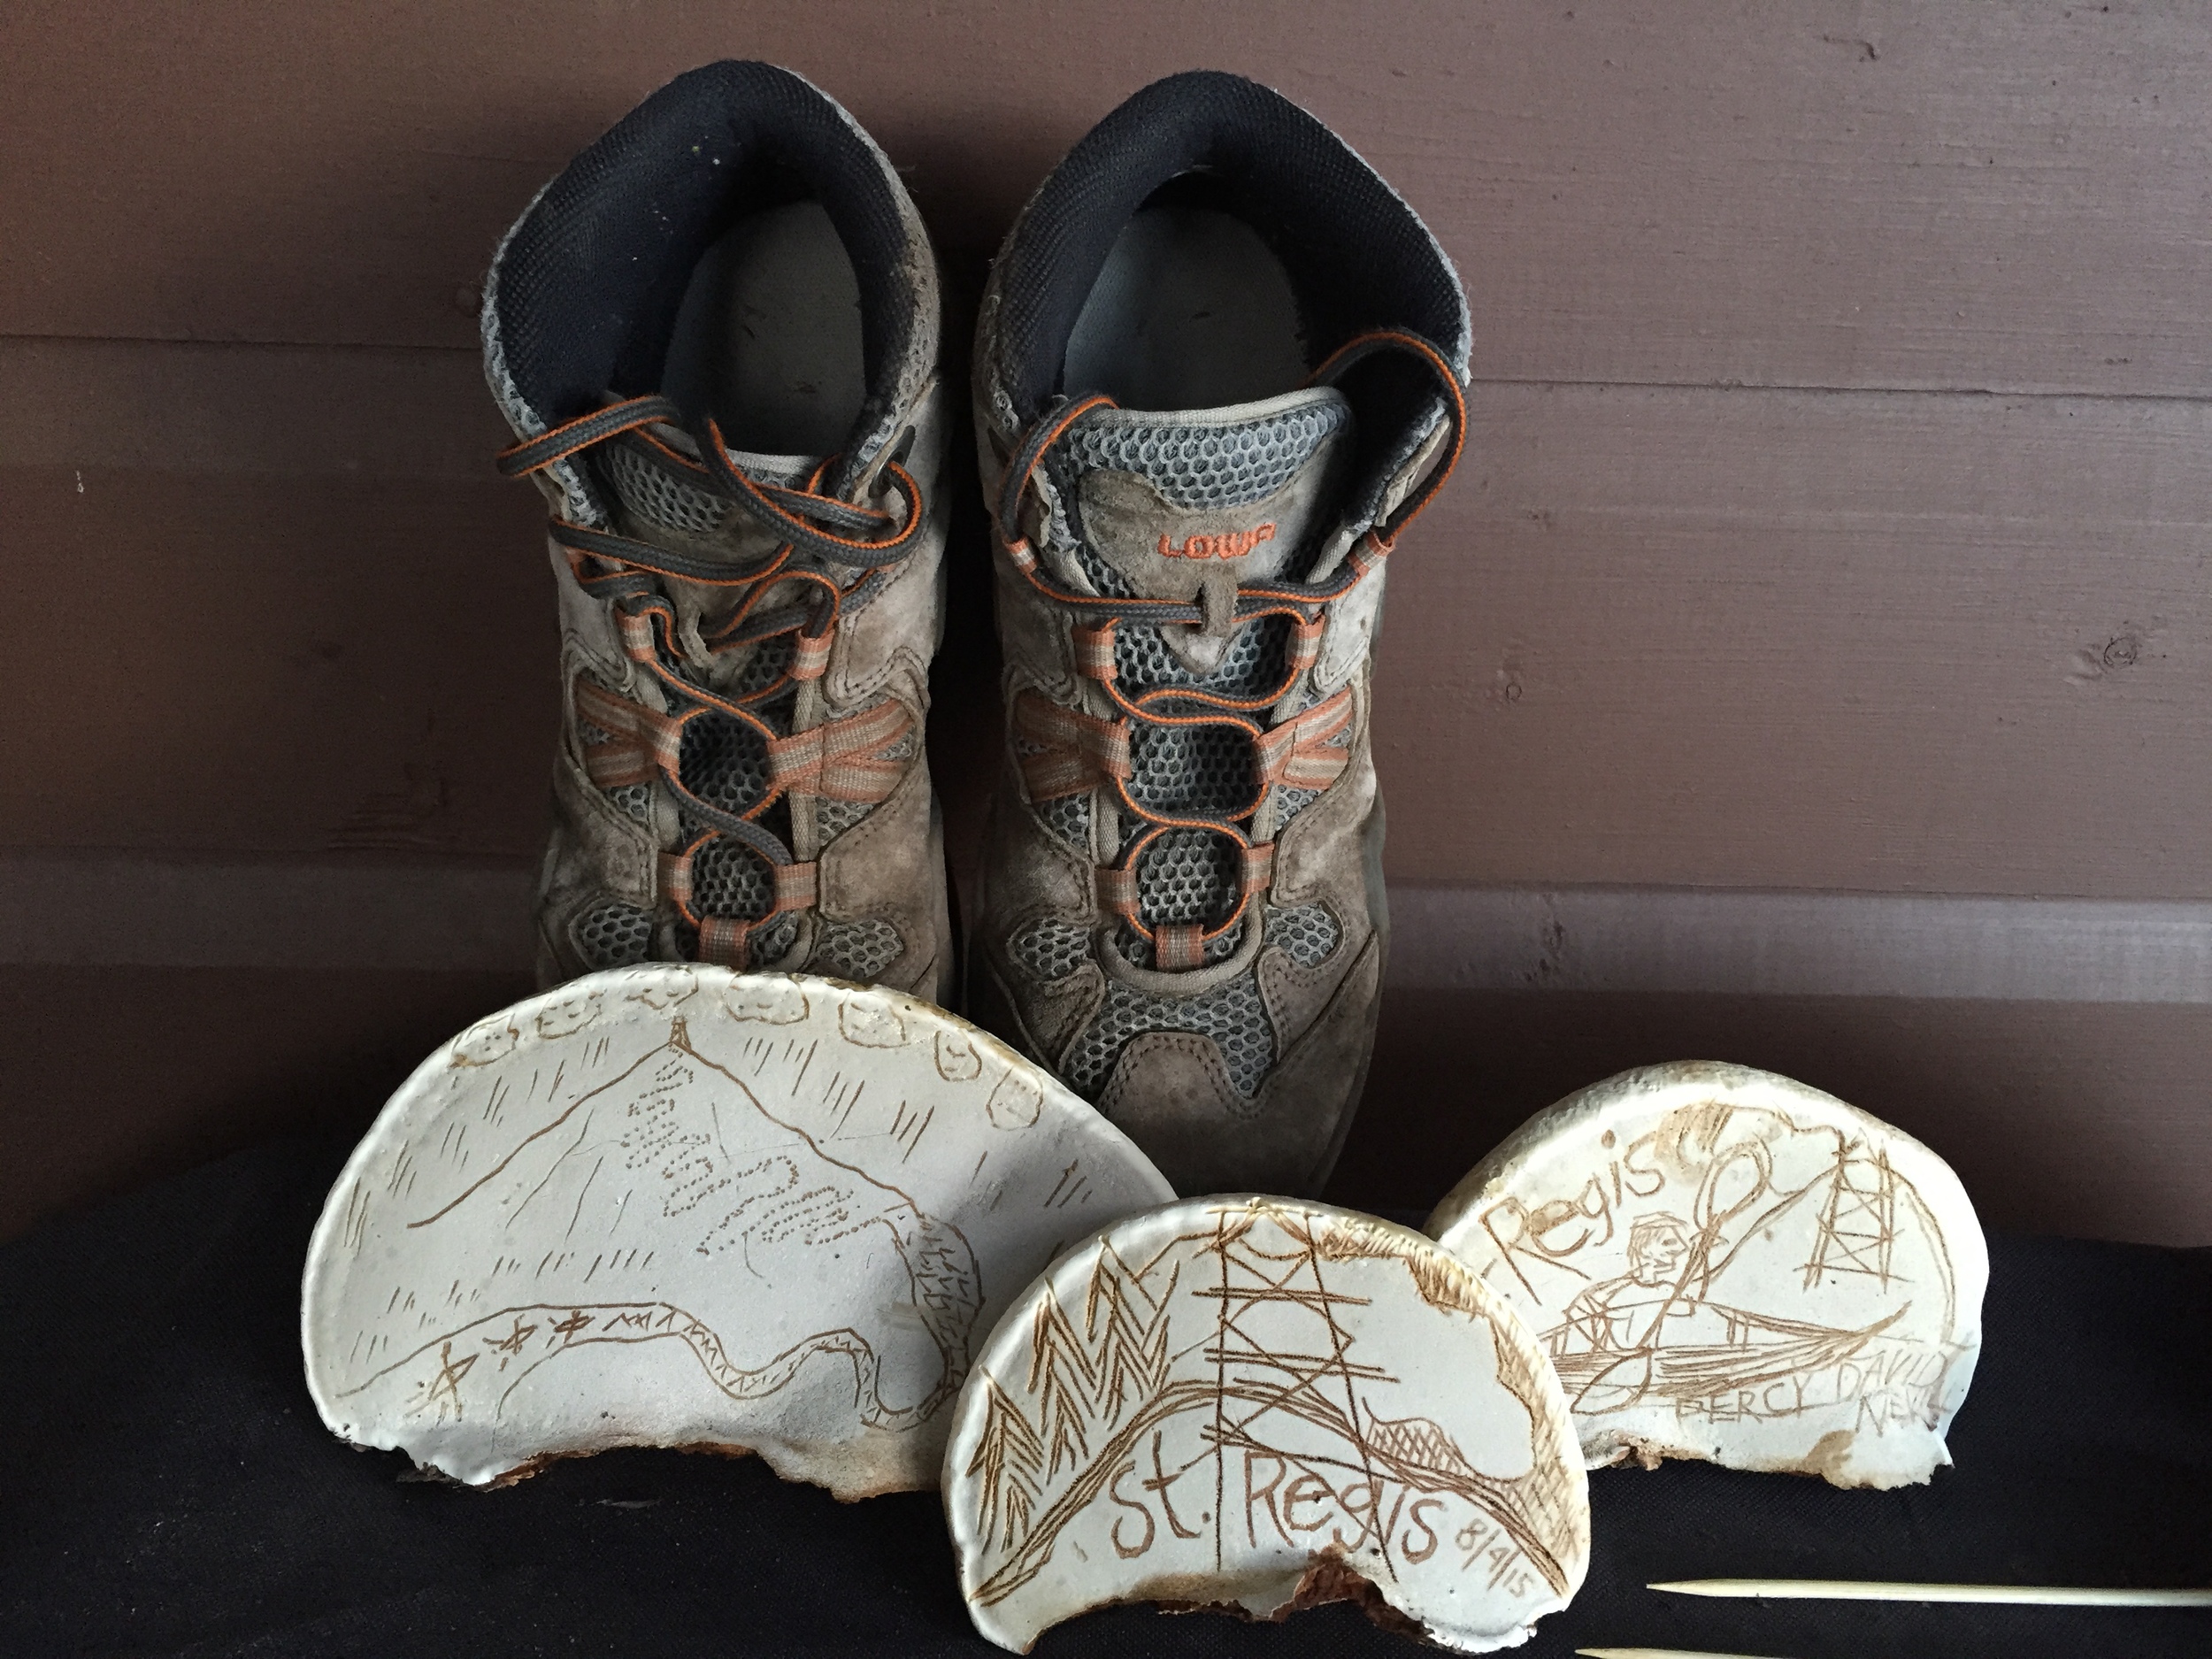 Artifacts of outdoor life in the Adirondacks